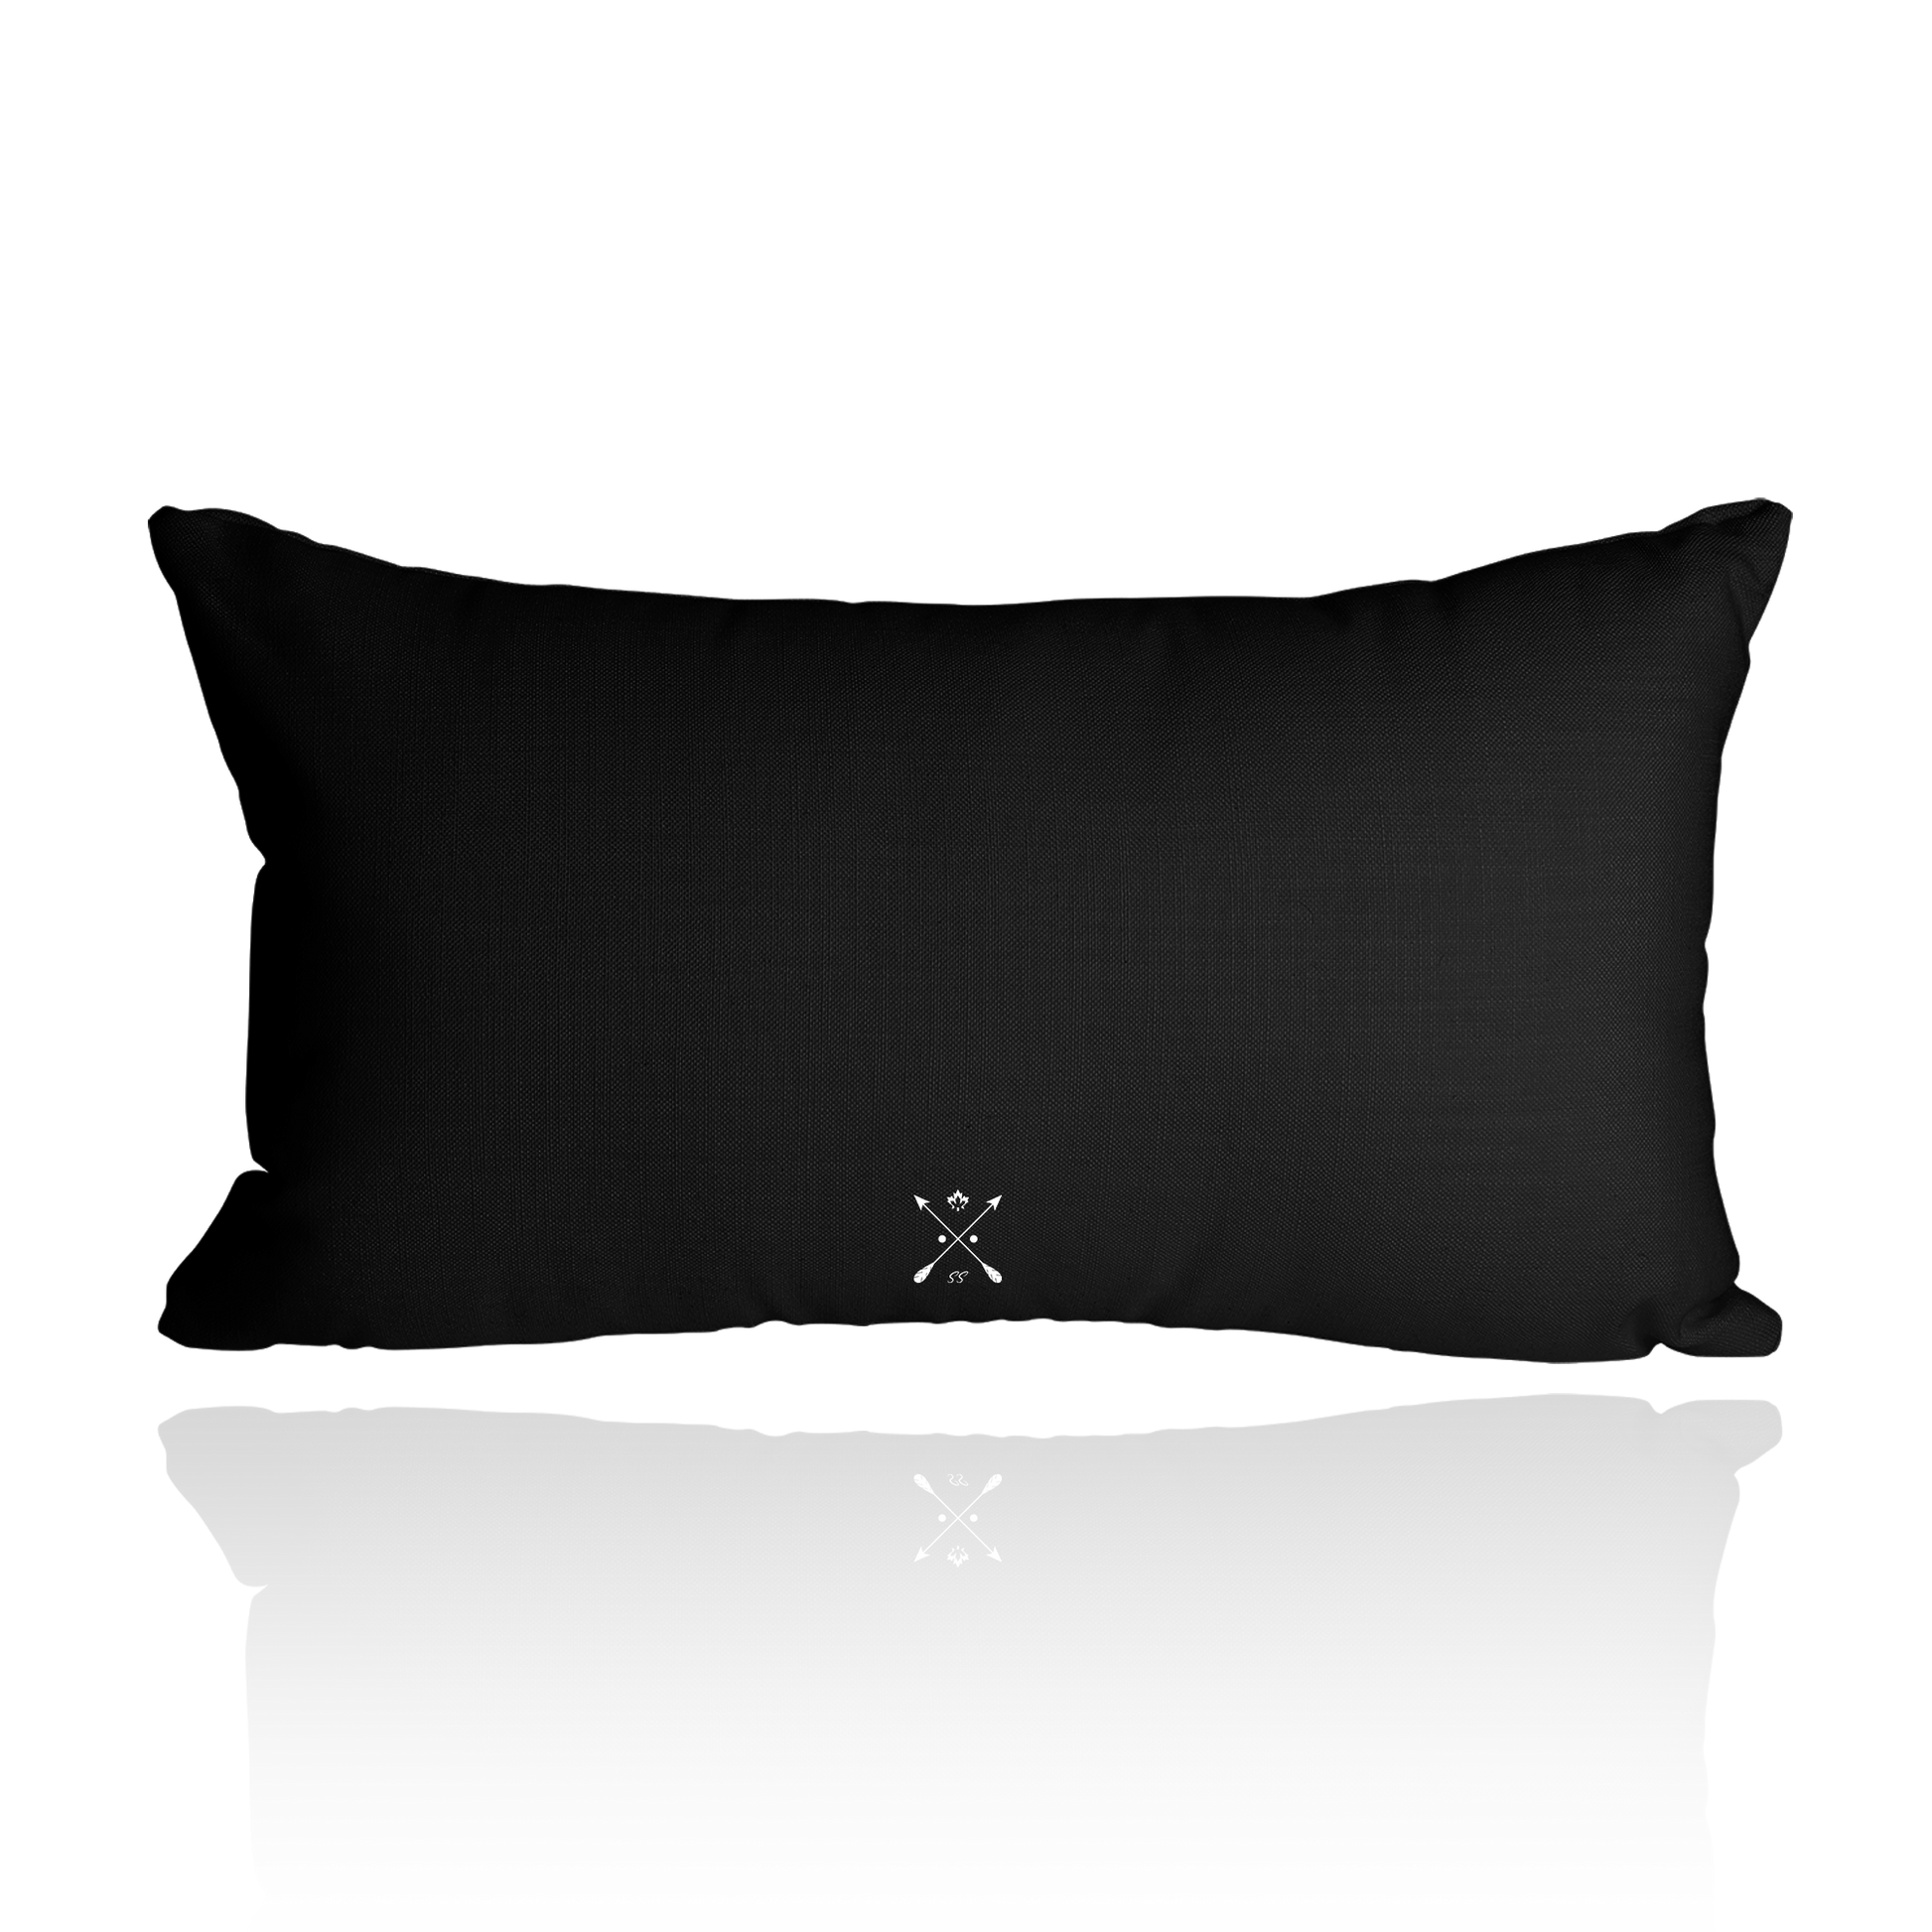 Vampires and Werewolves Throw Pillow